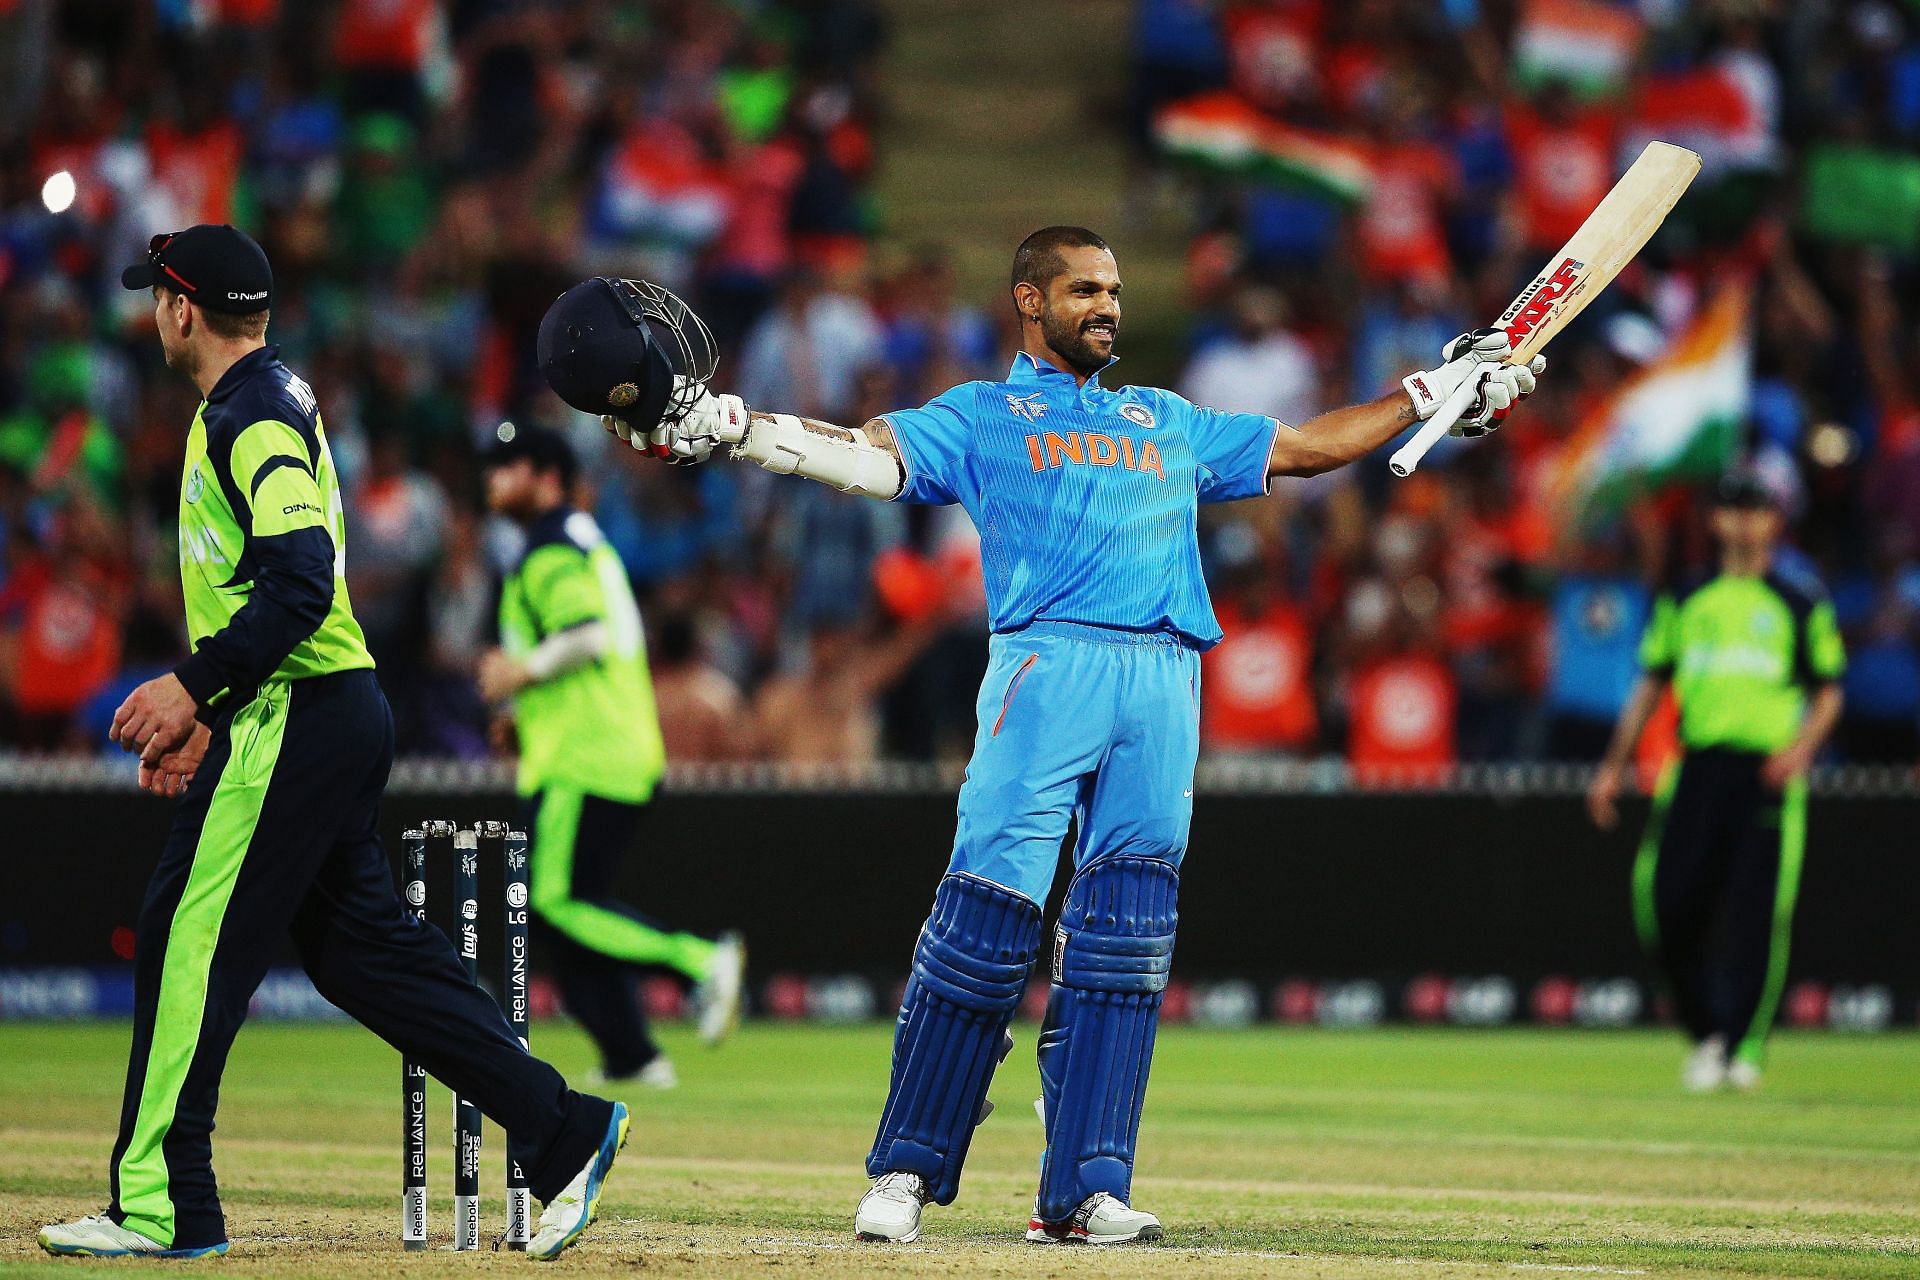 Shikhar Dhawan acknowledging his ton in the India v Ireland - 2015 ICC Cricket World Cup Match [Getty]